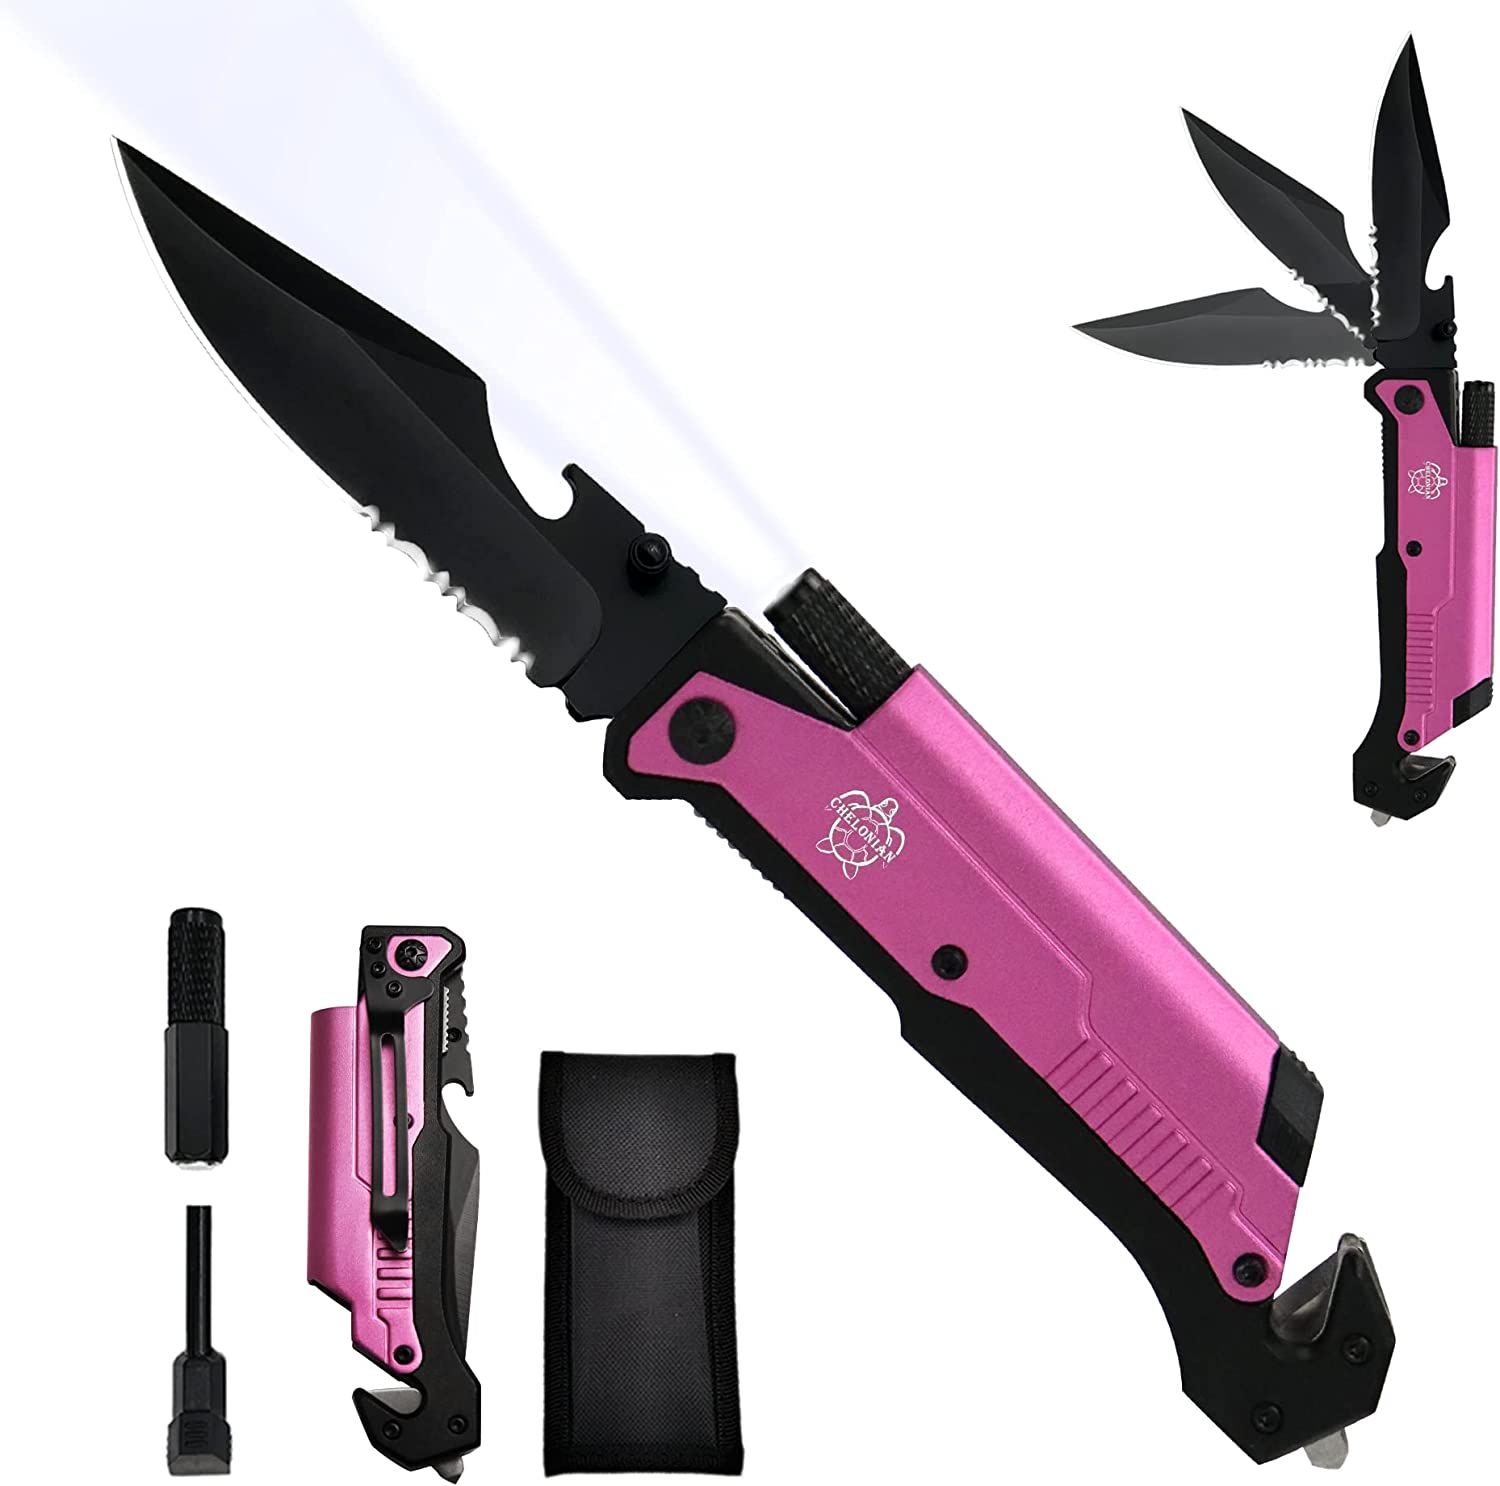 CHELONIAN 8.5" Military Outdoor Hunting Camping Pocket Knife, 7 in 1 Multi-Function Folding Knives with Fire Starter LED Light Seatbelt Cutter Glass Breaker Bottle Opener Tactical Blade (Pink)